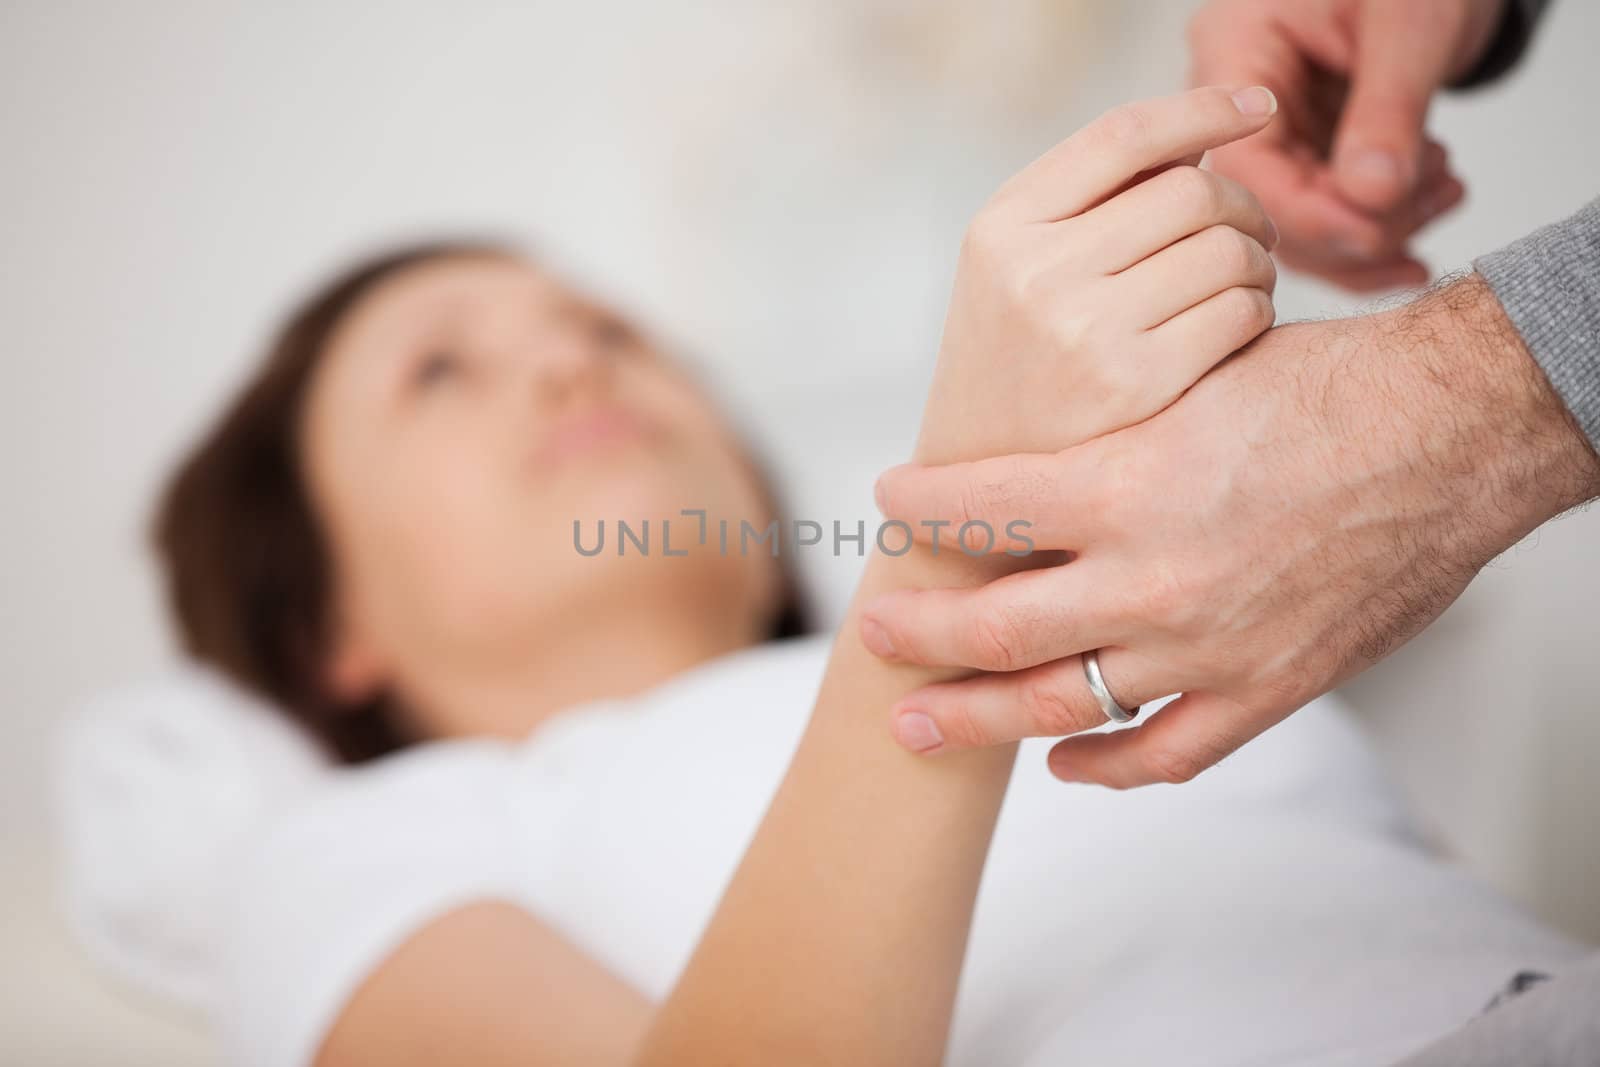 Hand of a woman being manipulated in a medical office